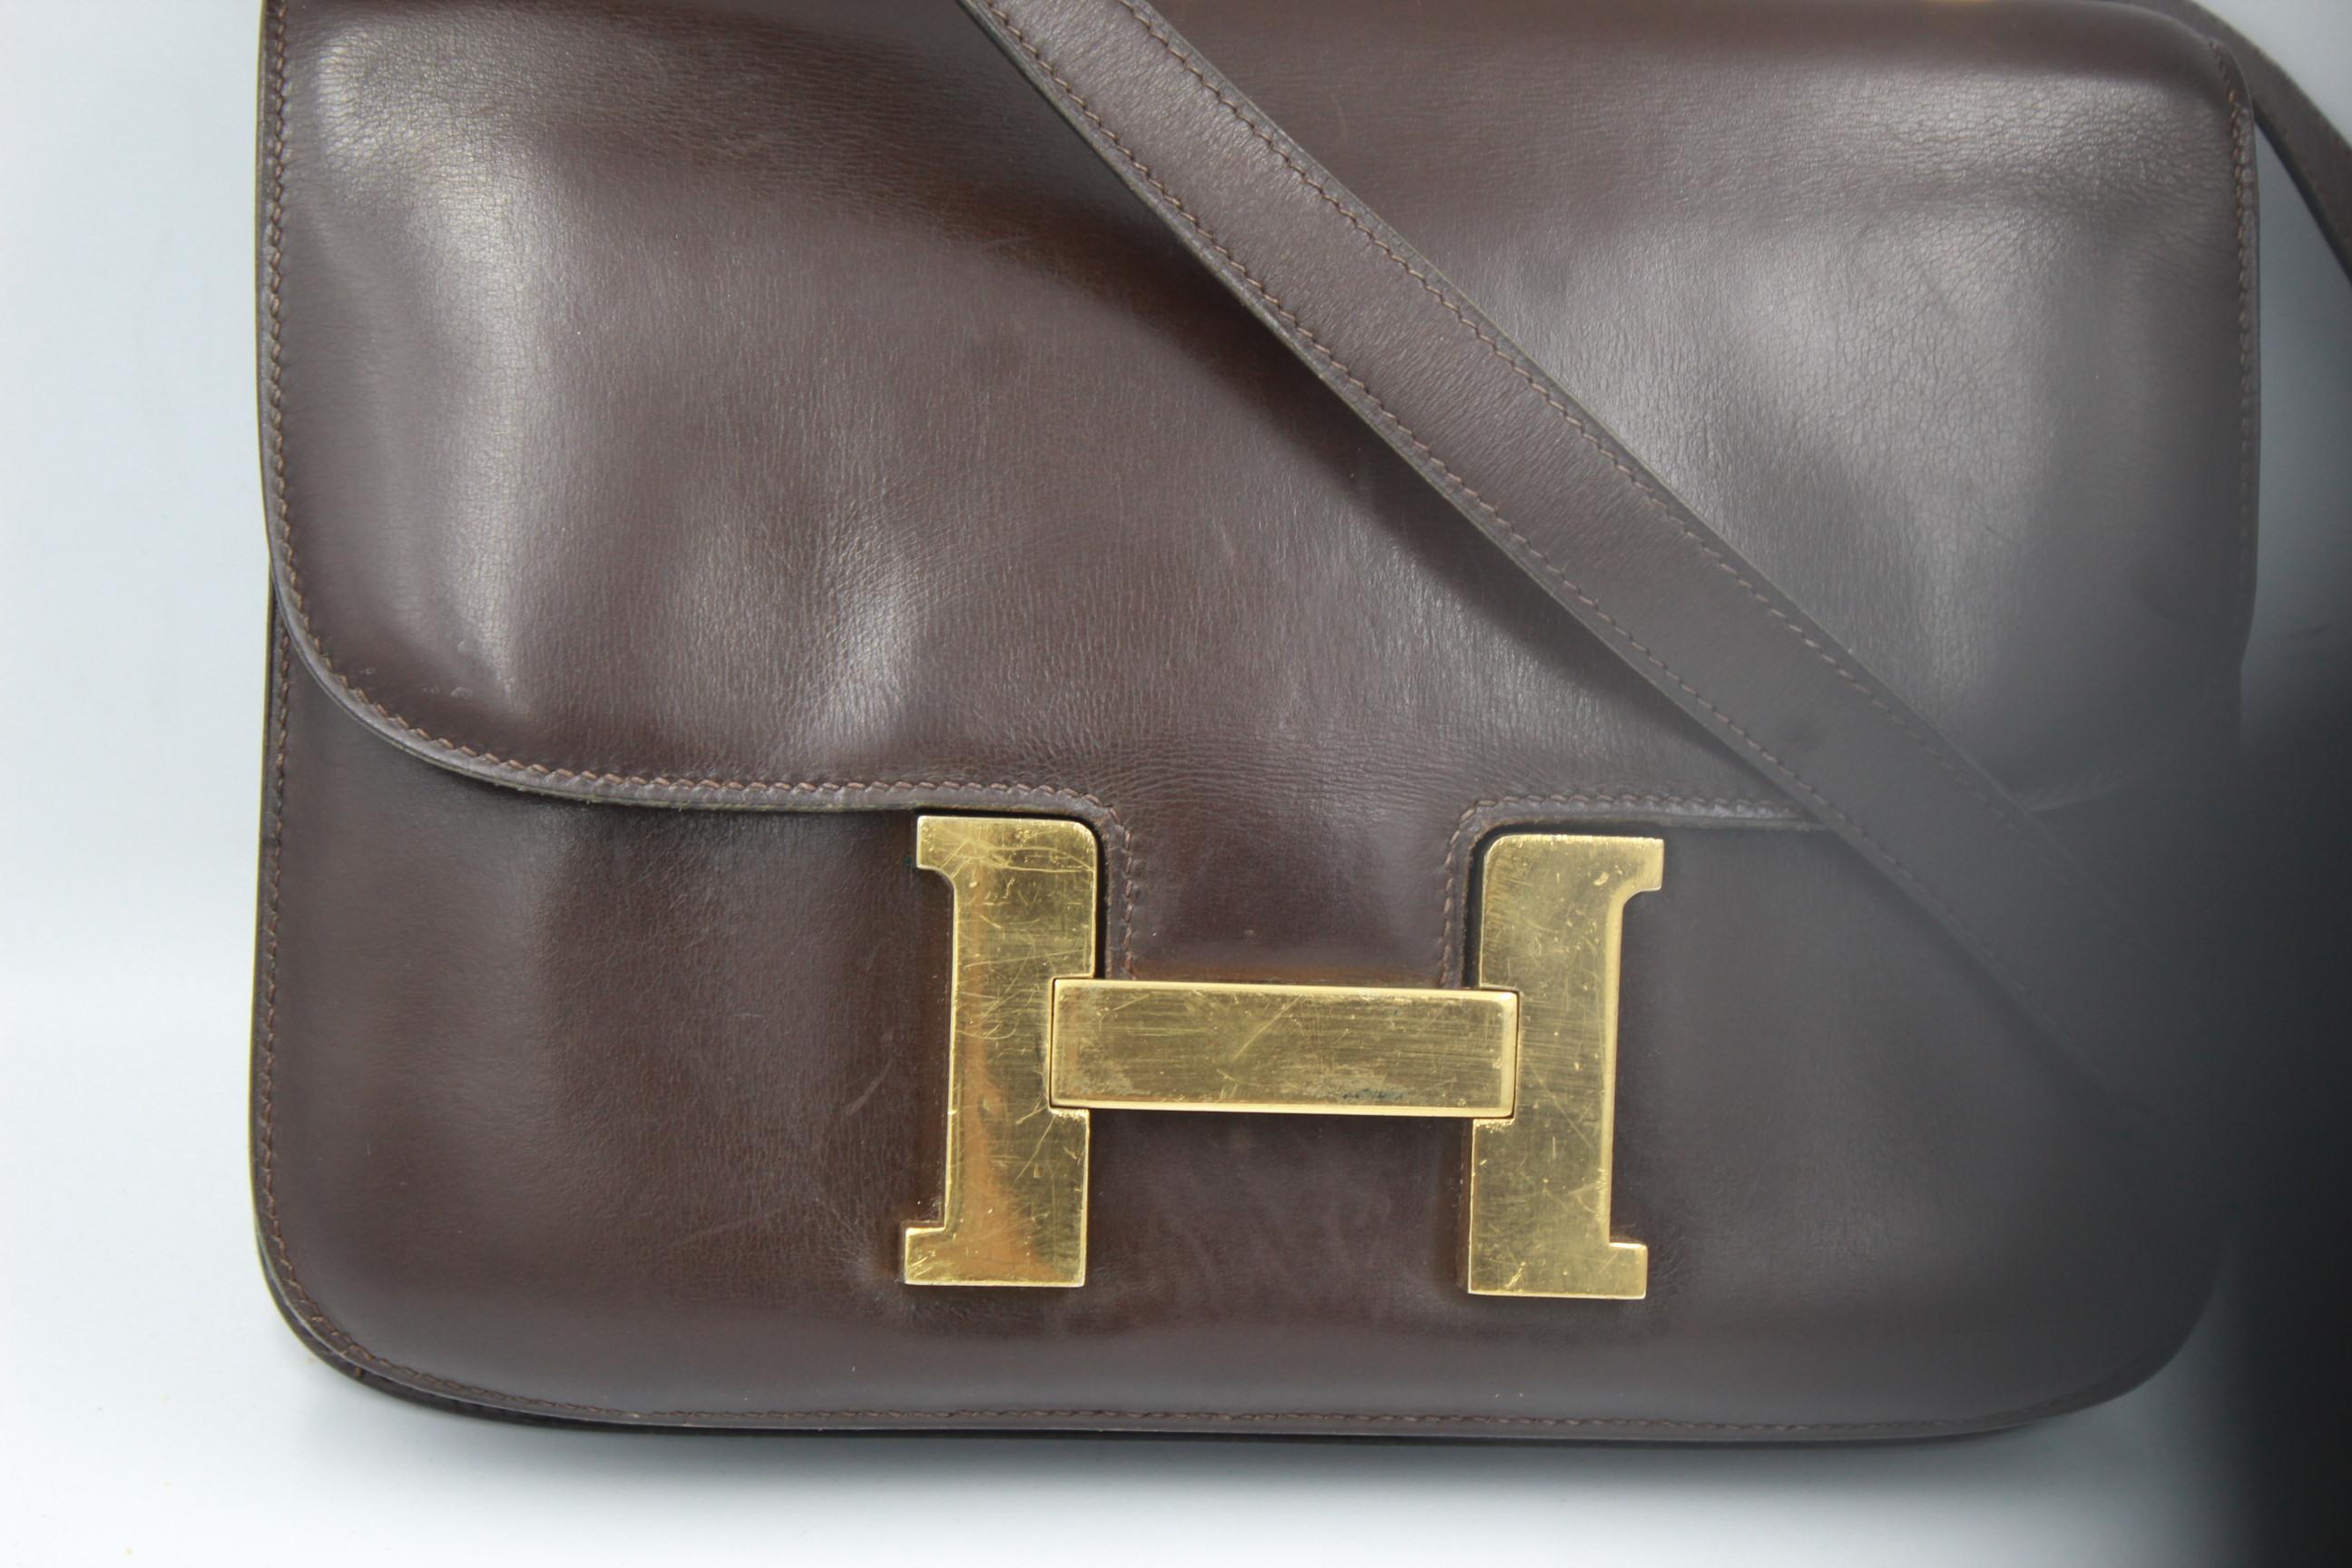 Nice vintage Hermes Constance bag in brown box leather.

Vintage bag in good vintage coondition, leather not cracked. Some signs of wear in the hardware ( scratches)
Size 23 cm